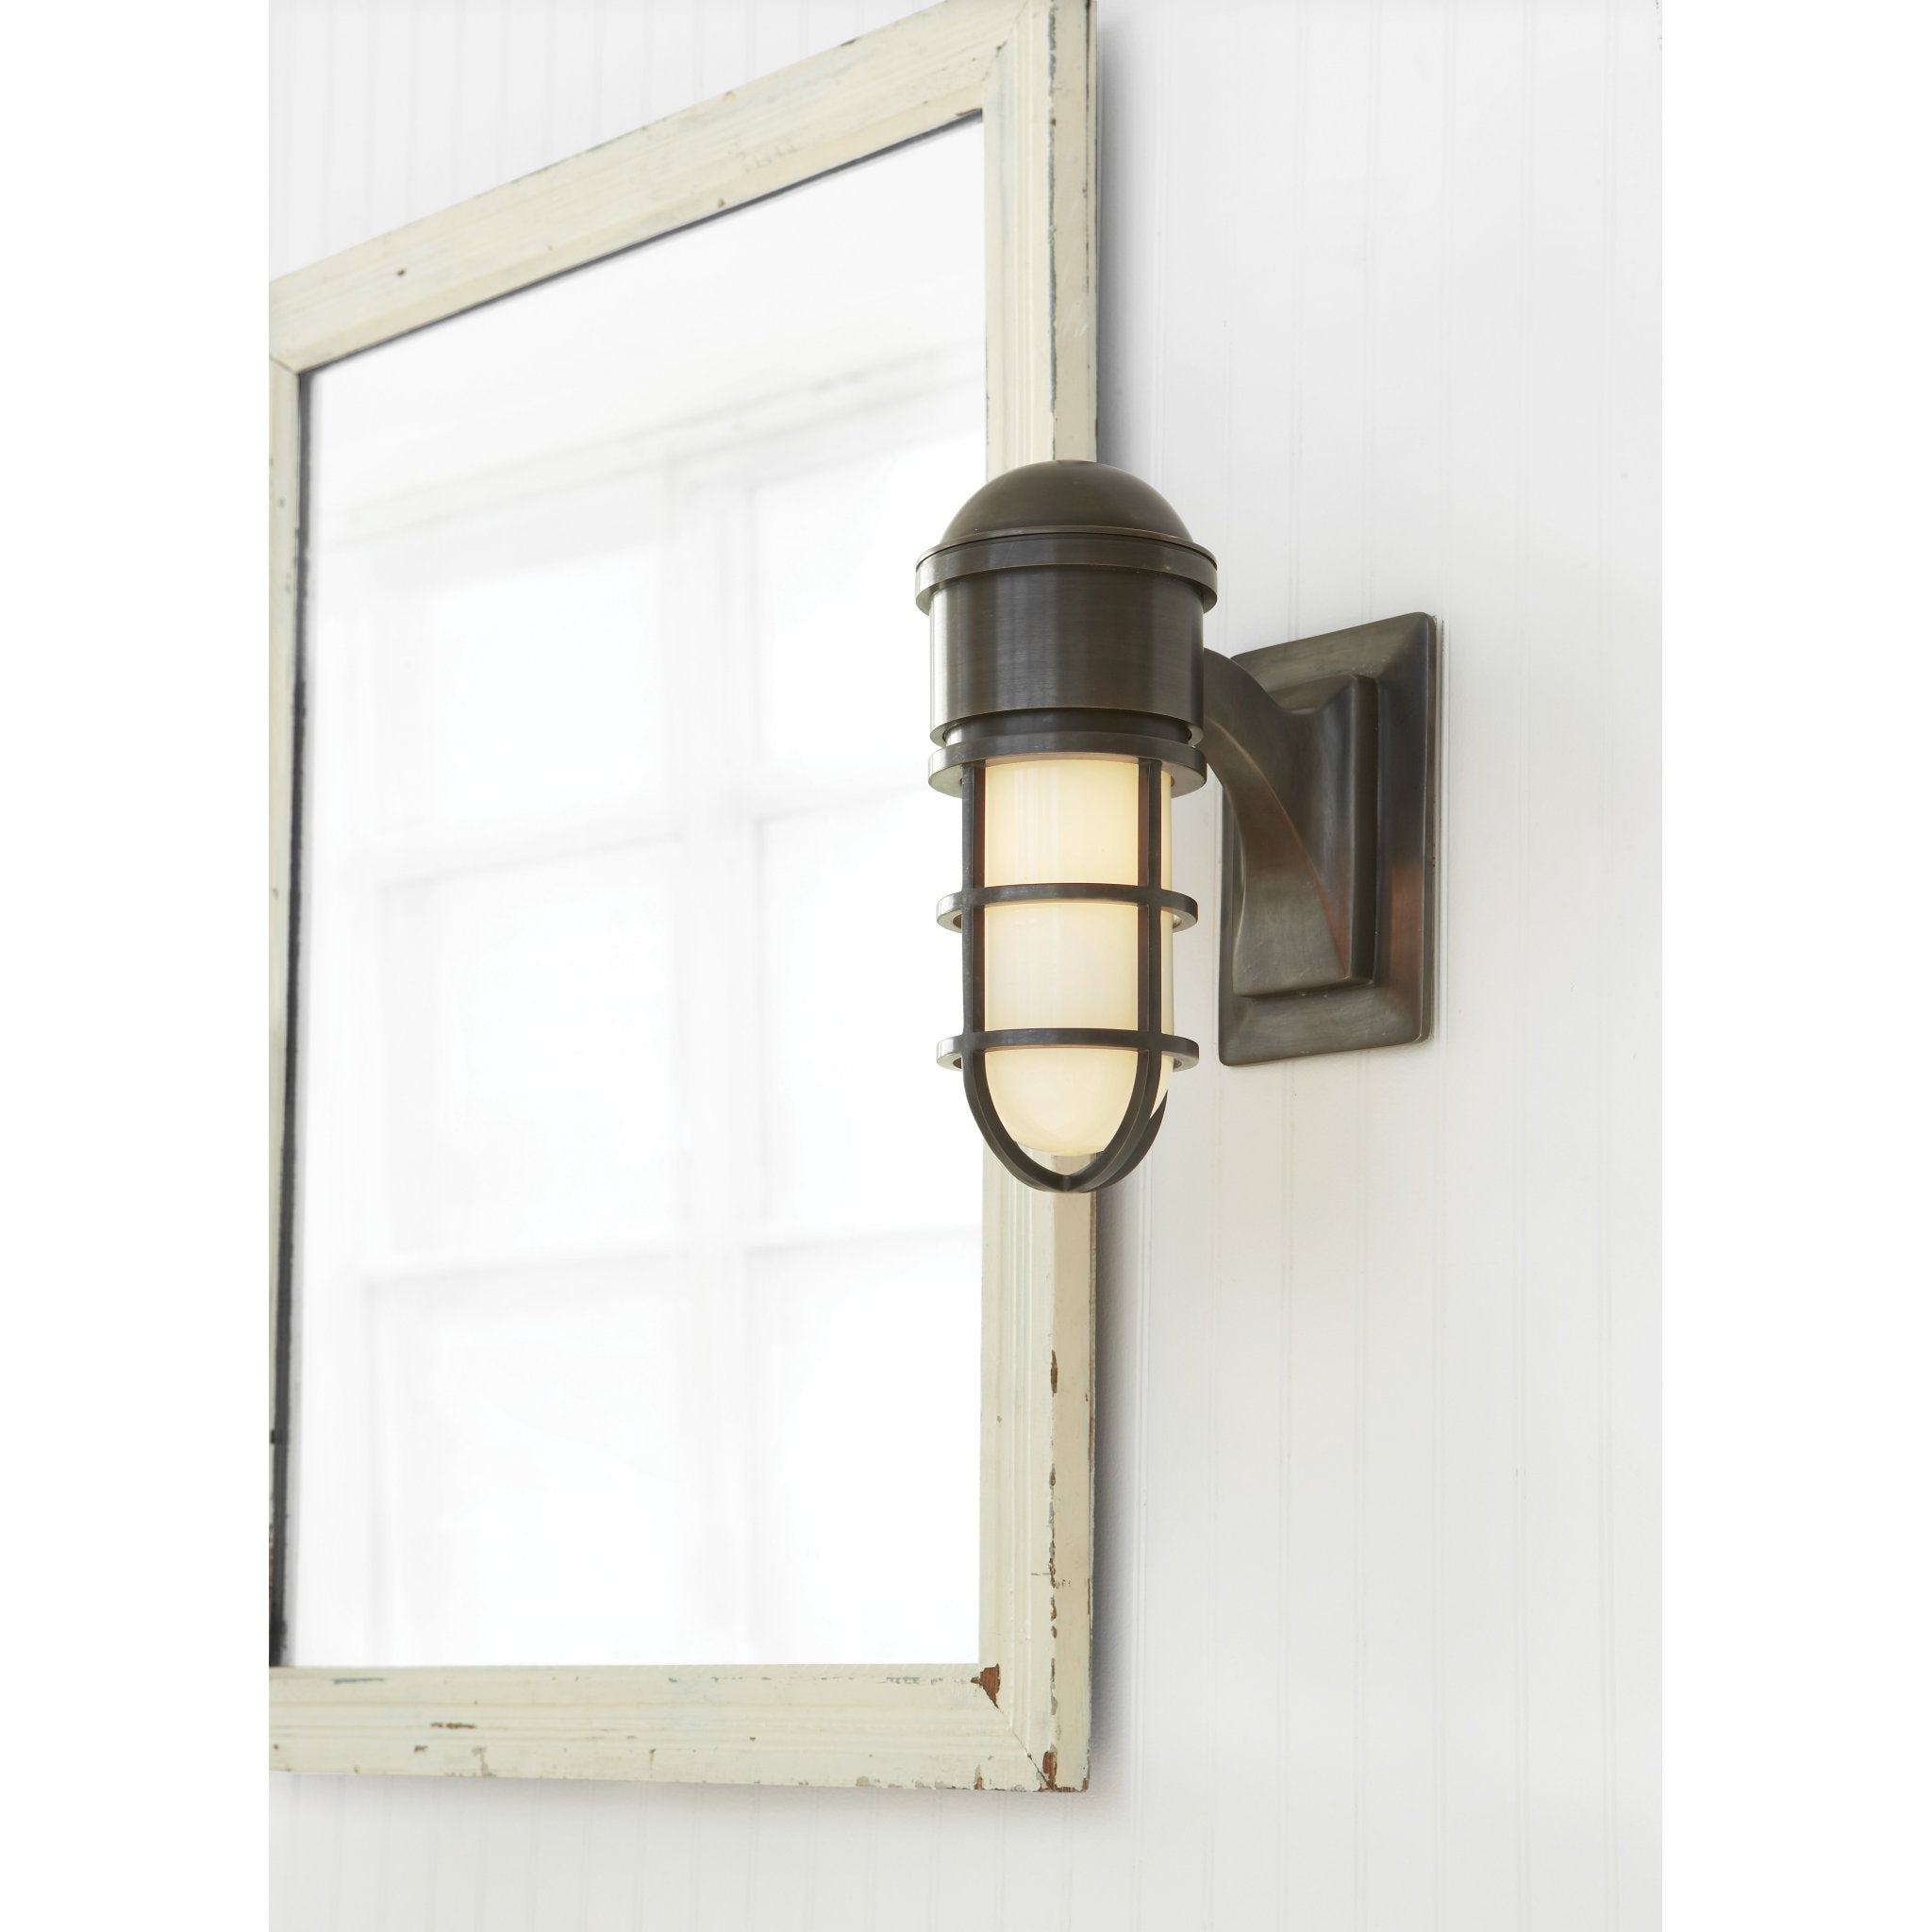 Chapman & Myers Marine Wall Light in Bronze with White Glass